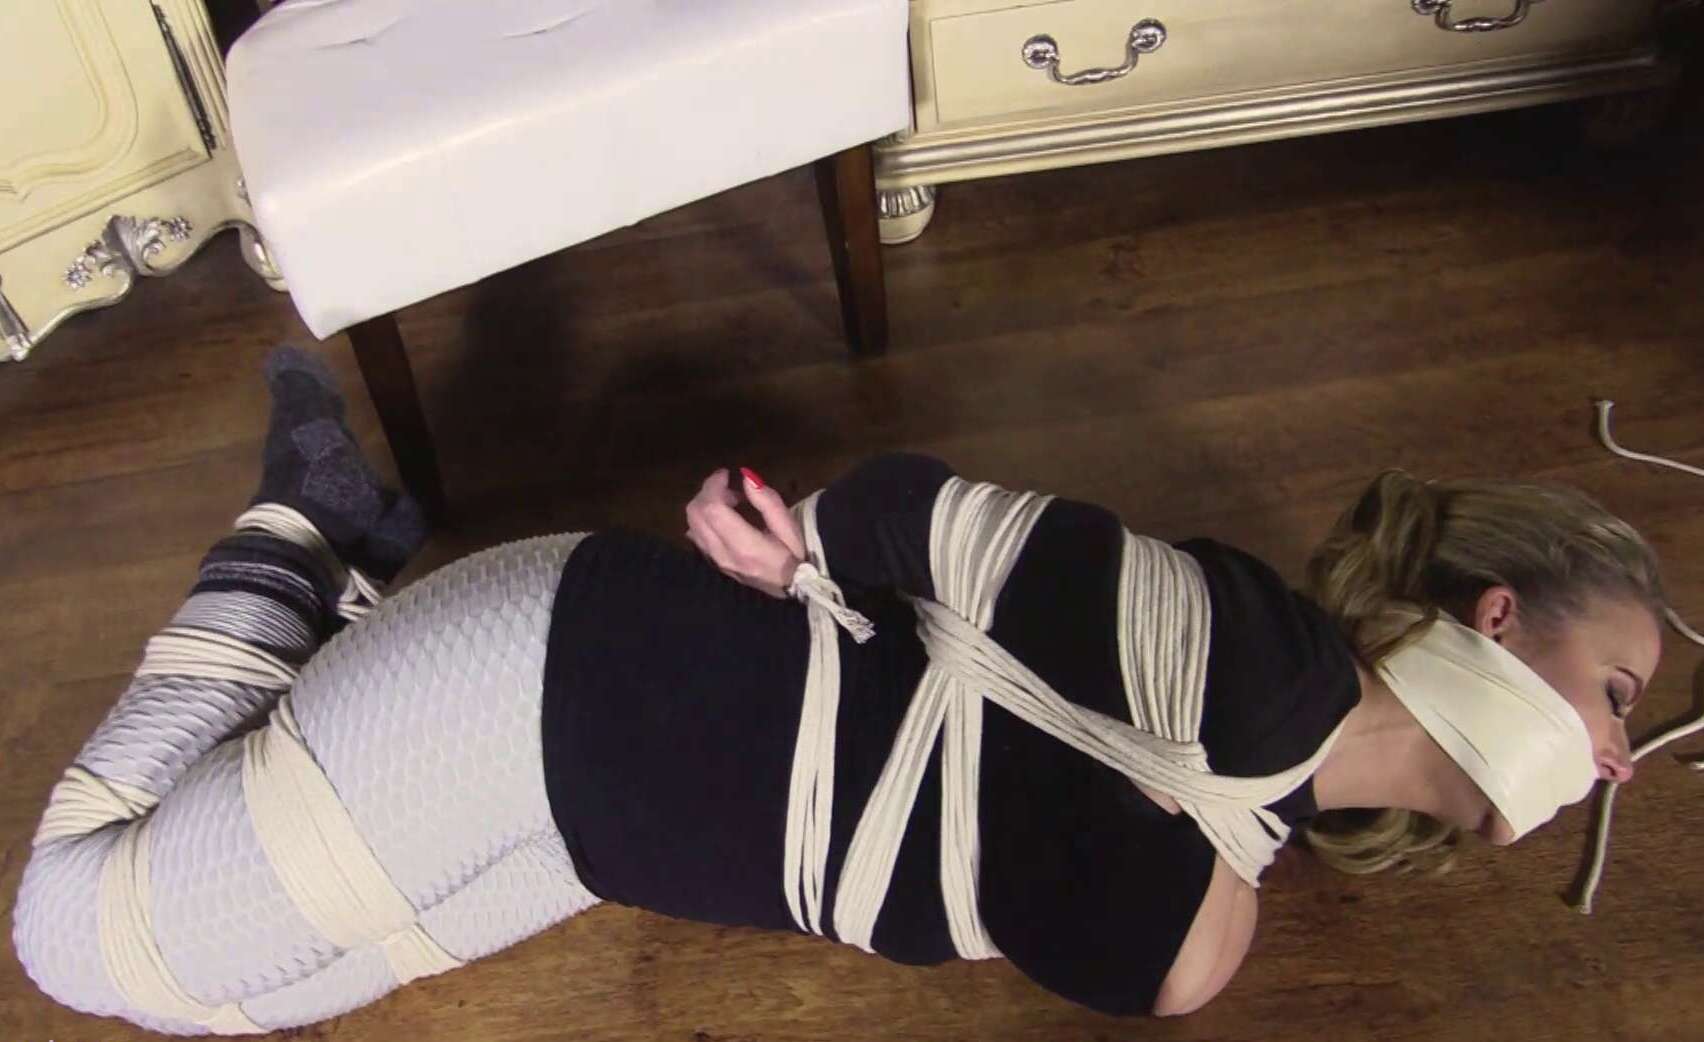 Rope Bondage - She just wanted to be tied up in her comfy clothes - Bondage M/F